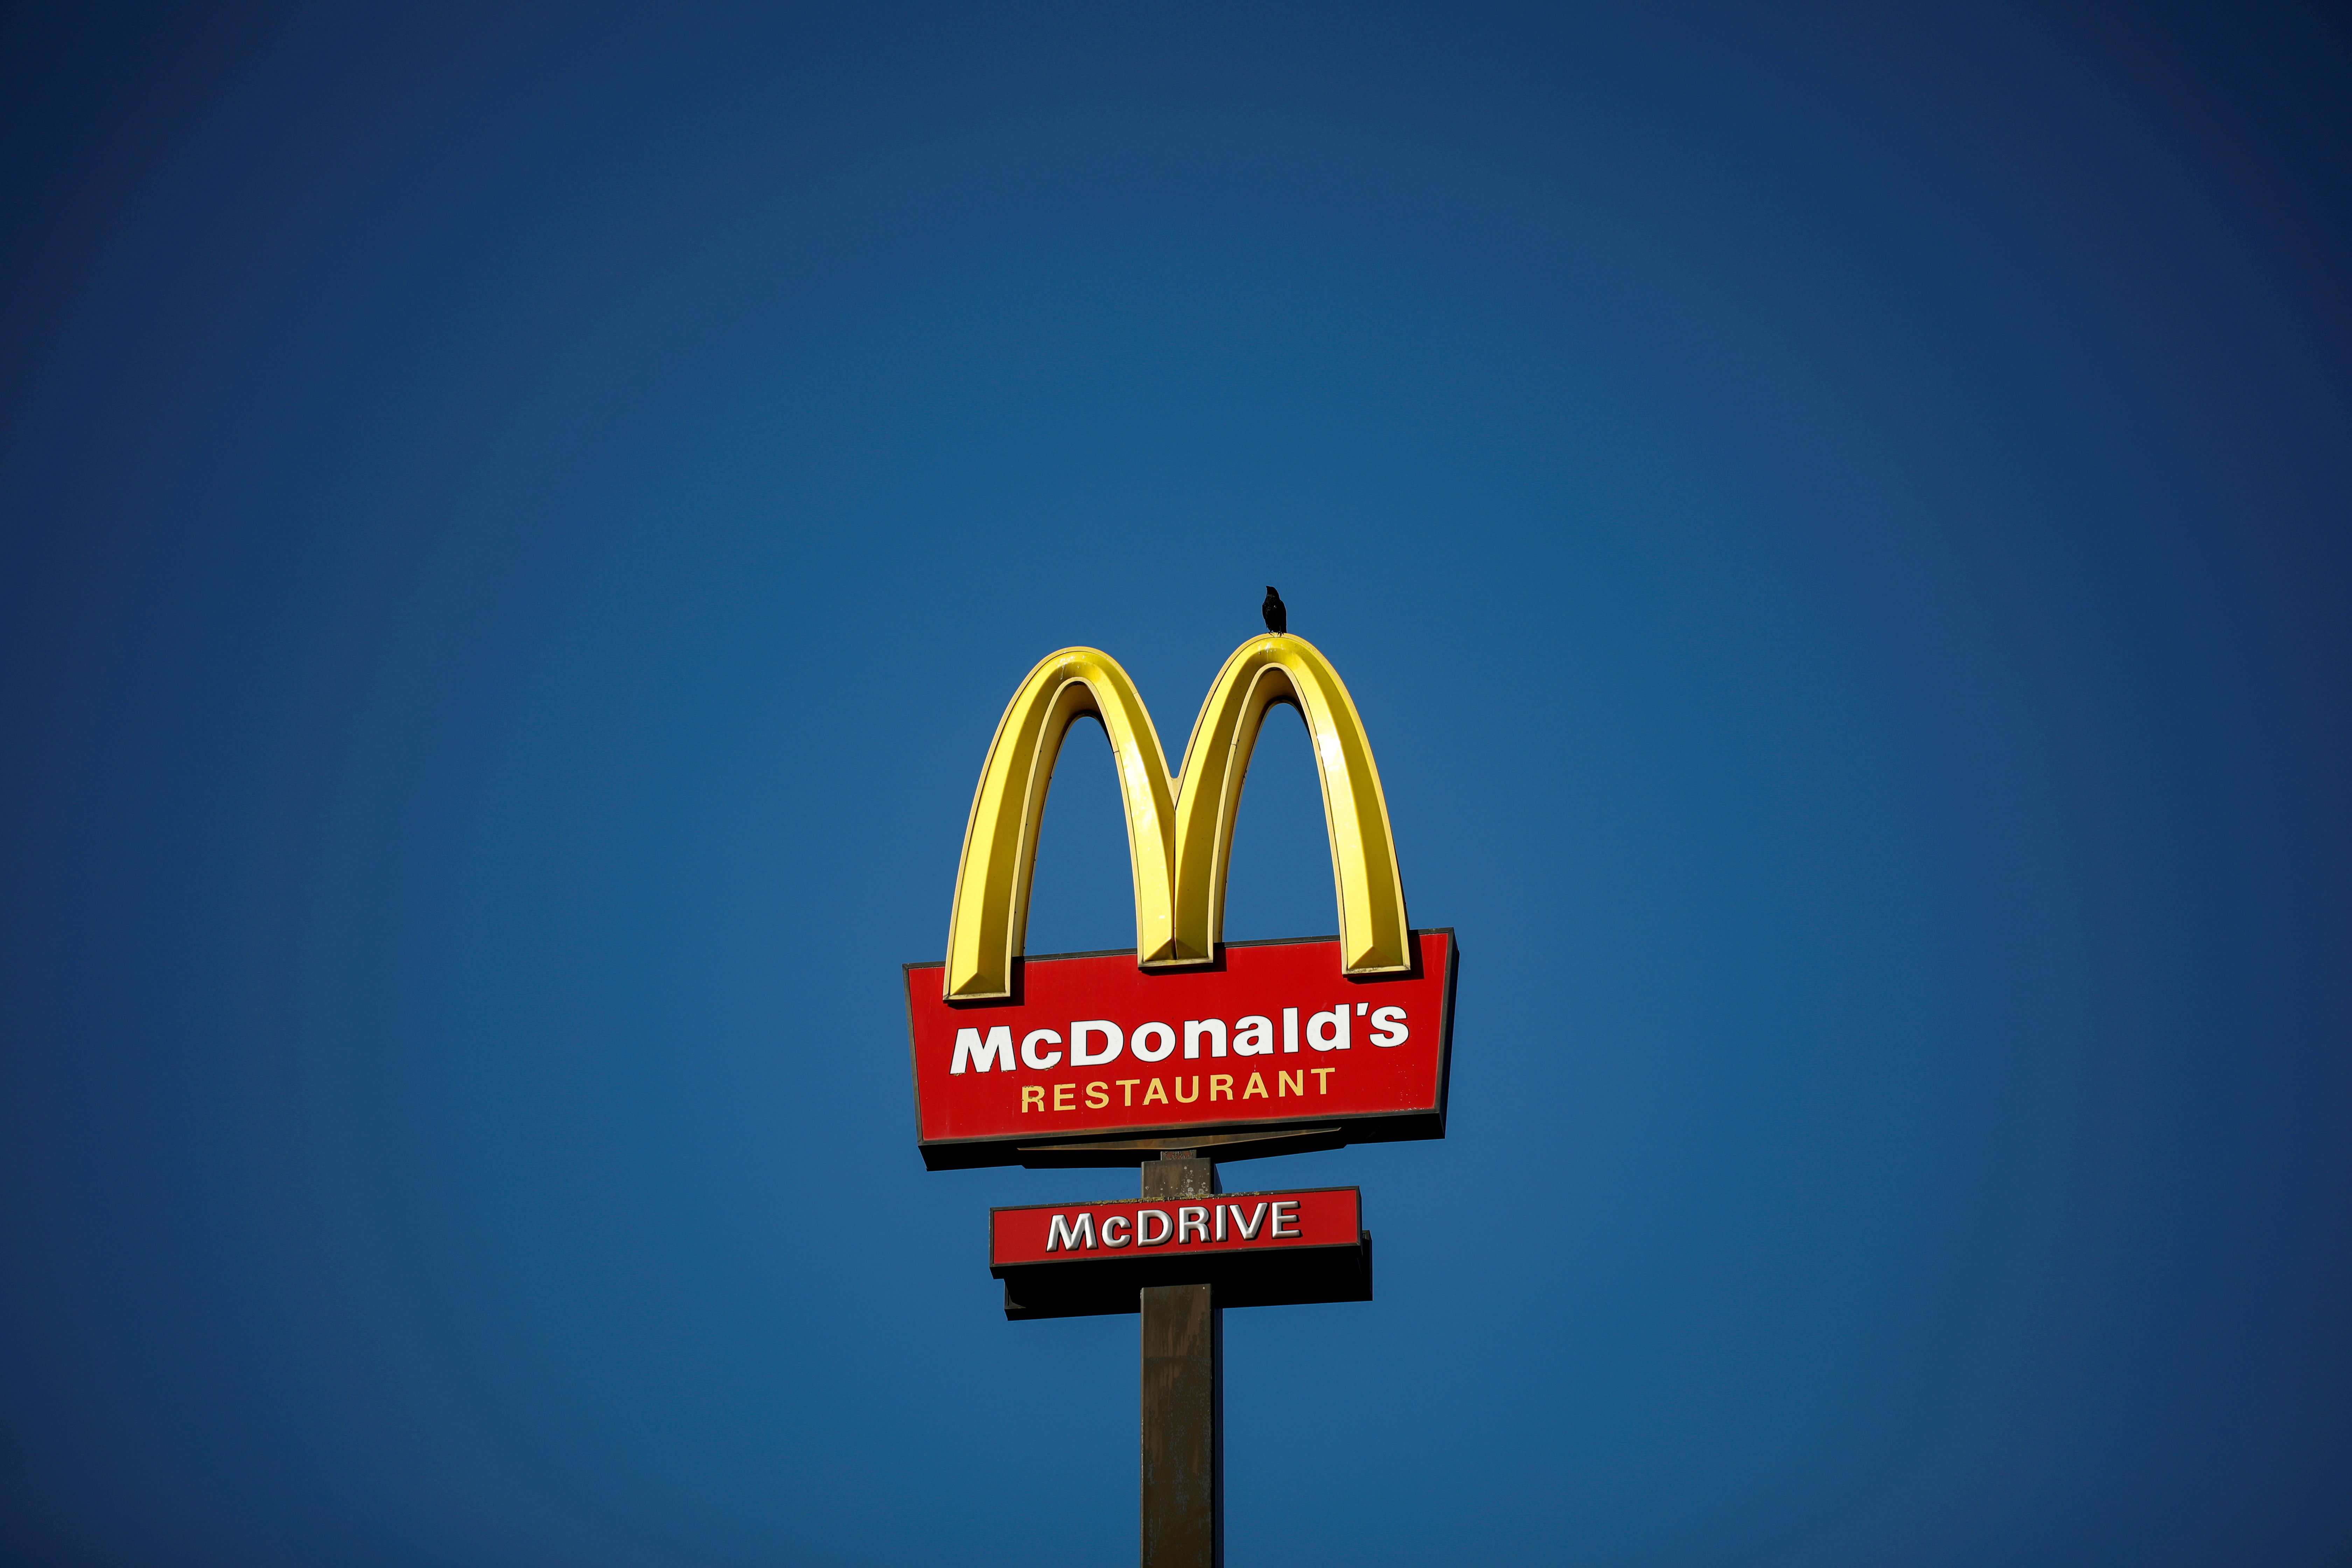 The McDonald's company logo stands on a sign outside a restaurant in Bretigny-sur-Orge, near Paris